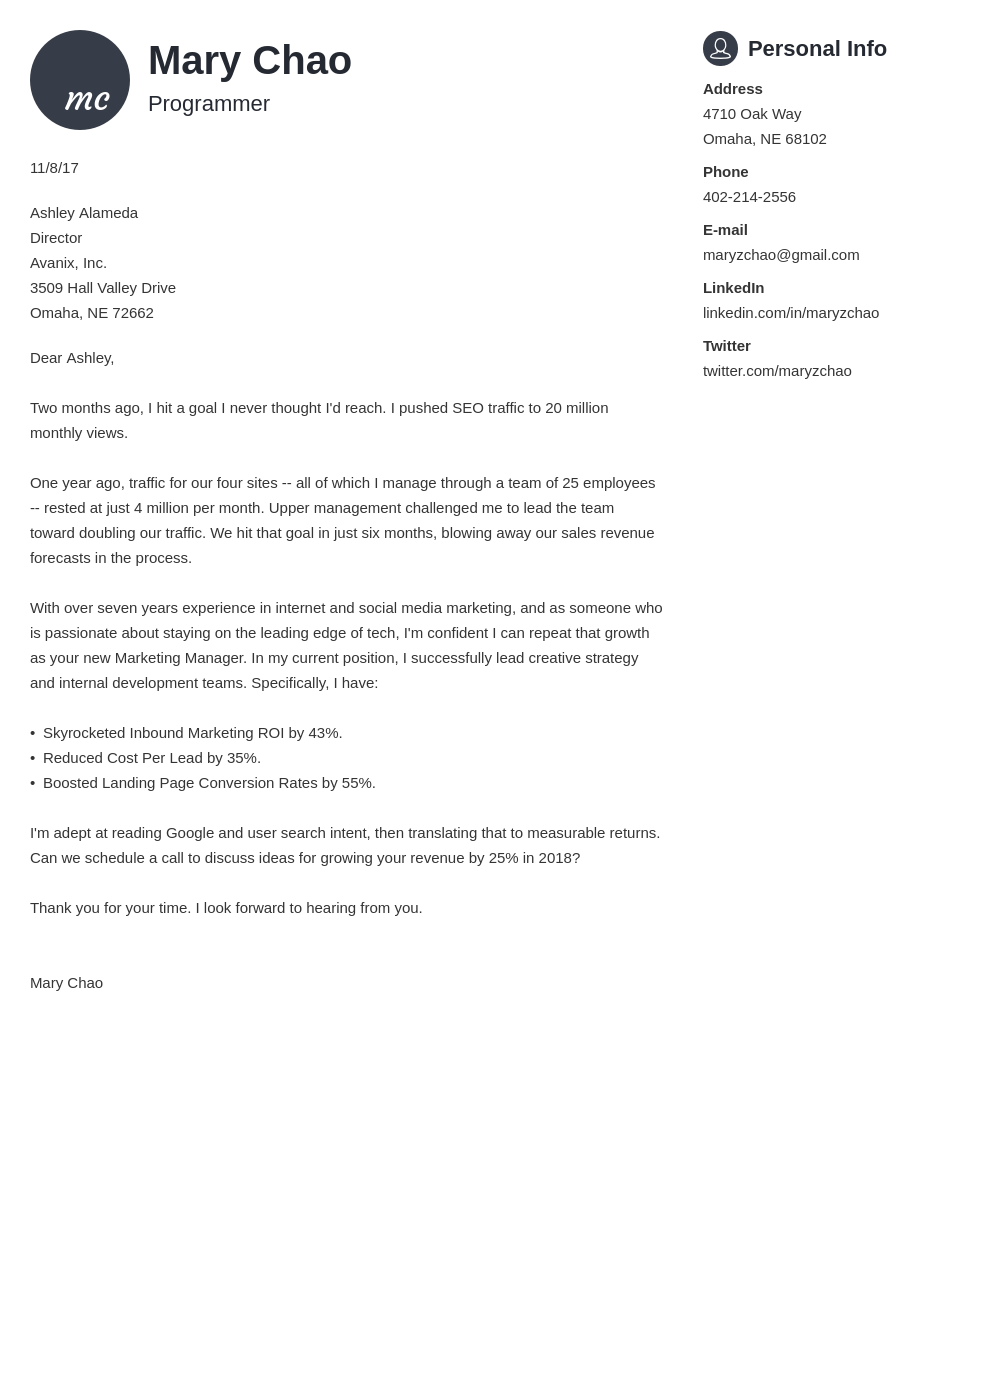 How to Format a Cover Letter in 12 12+ Structure Examples